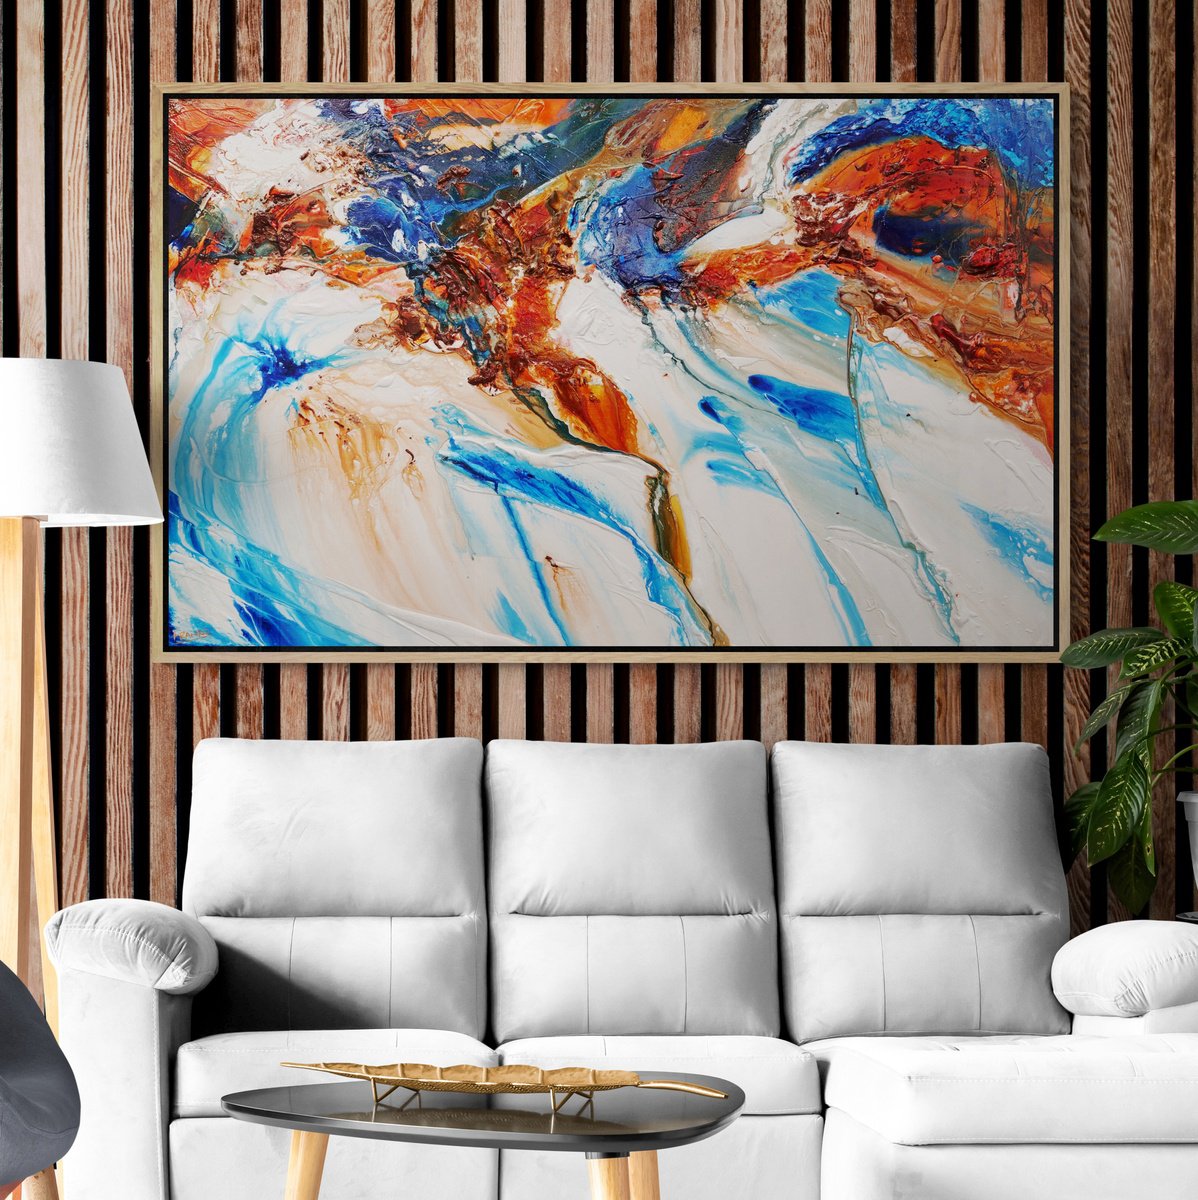 The West Coast 160cm x 100cm Textured Abstract Art by Franko